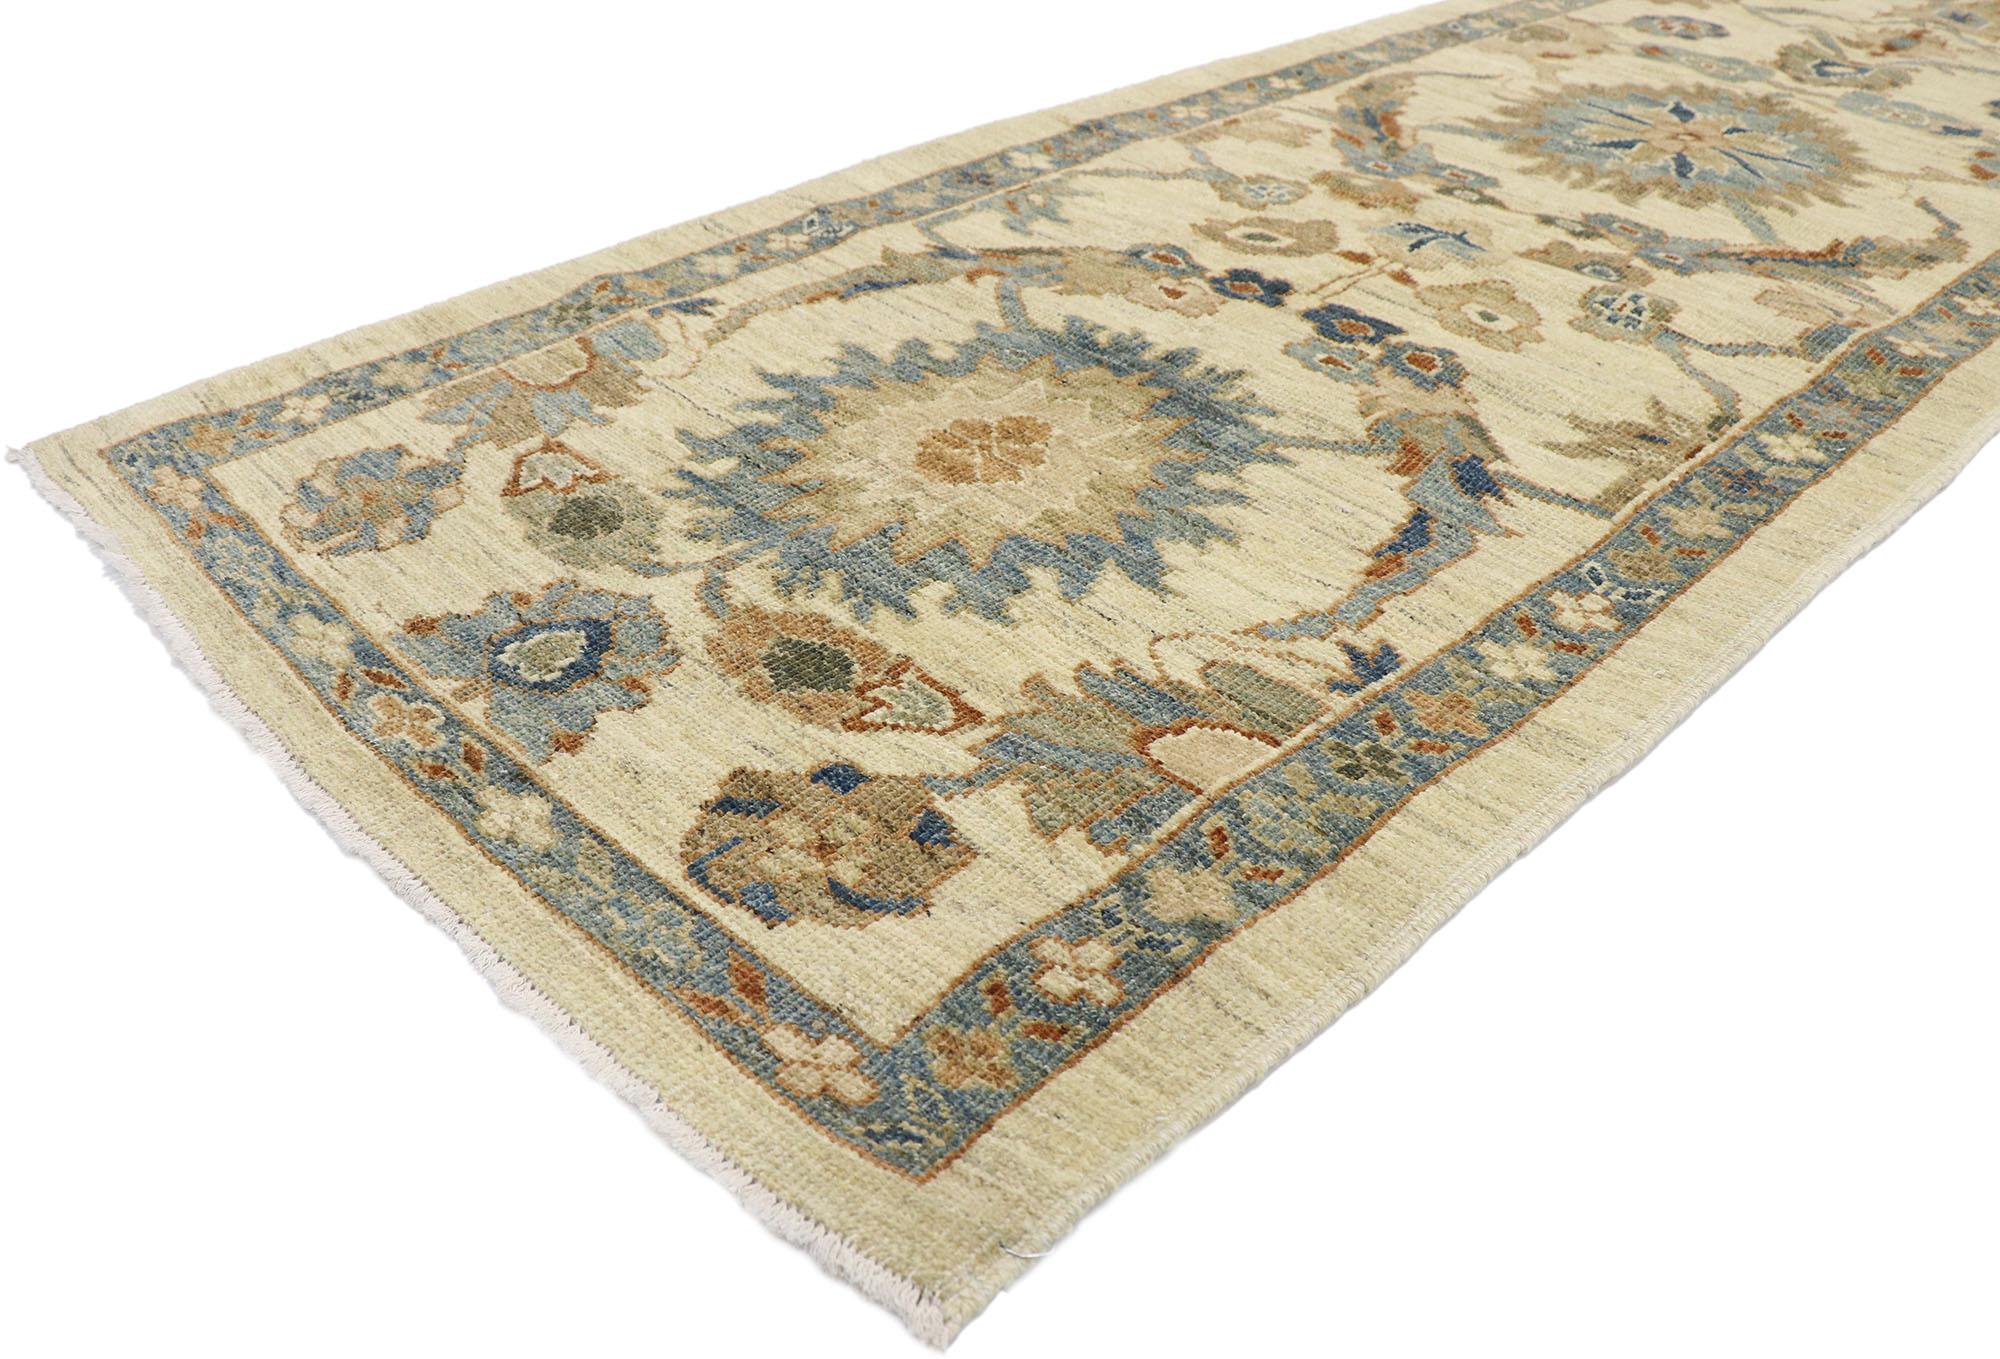 60914 New Contemporary Persian Style Sultanabad Runner with Modern Style 03'01 x 14'00. This hand-knotted wool contemporary Persian Style Sultanabad carpet runner features an all-over botanical pattern spread across an abrashed sandy-beige field. An